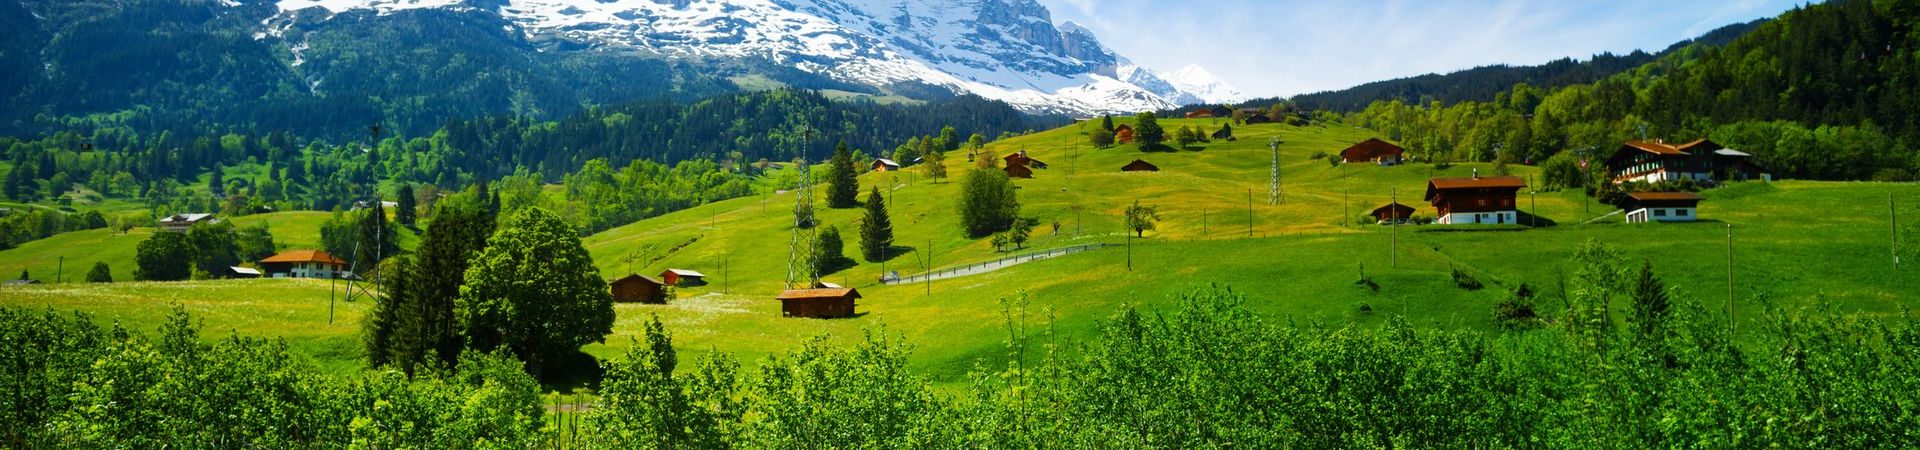 Blooming yellow flowers field of beautiful Swiss landscape with Alps mountains covered with snow in summer